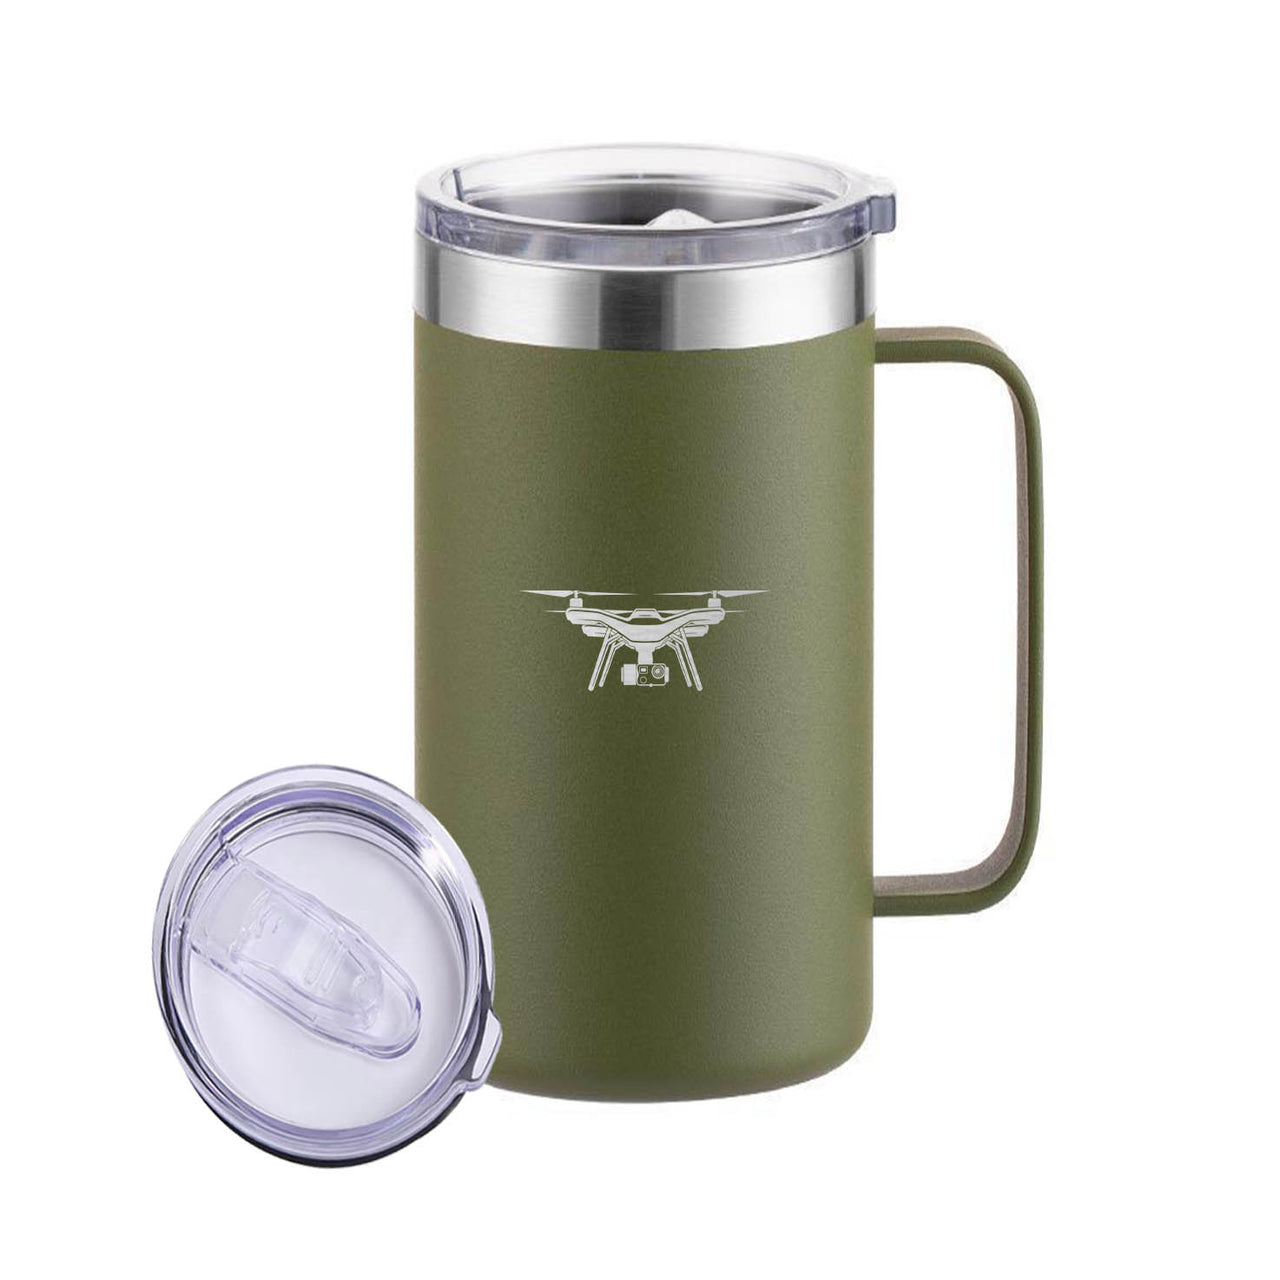 Drone Silhouette Designed Stainless Steel Beer Mugs